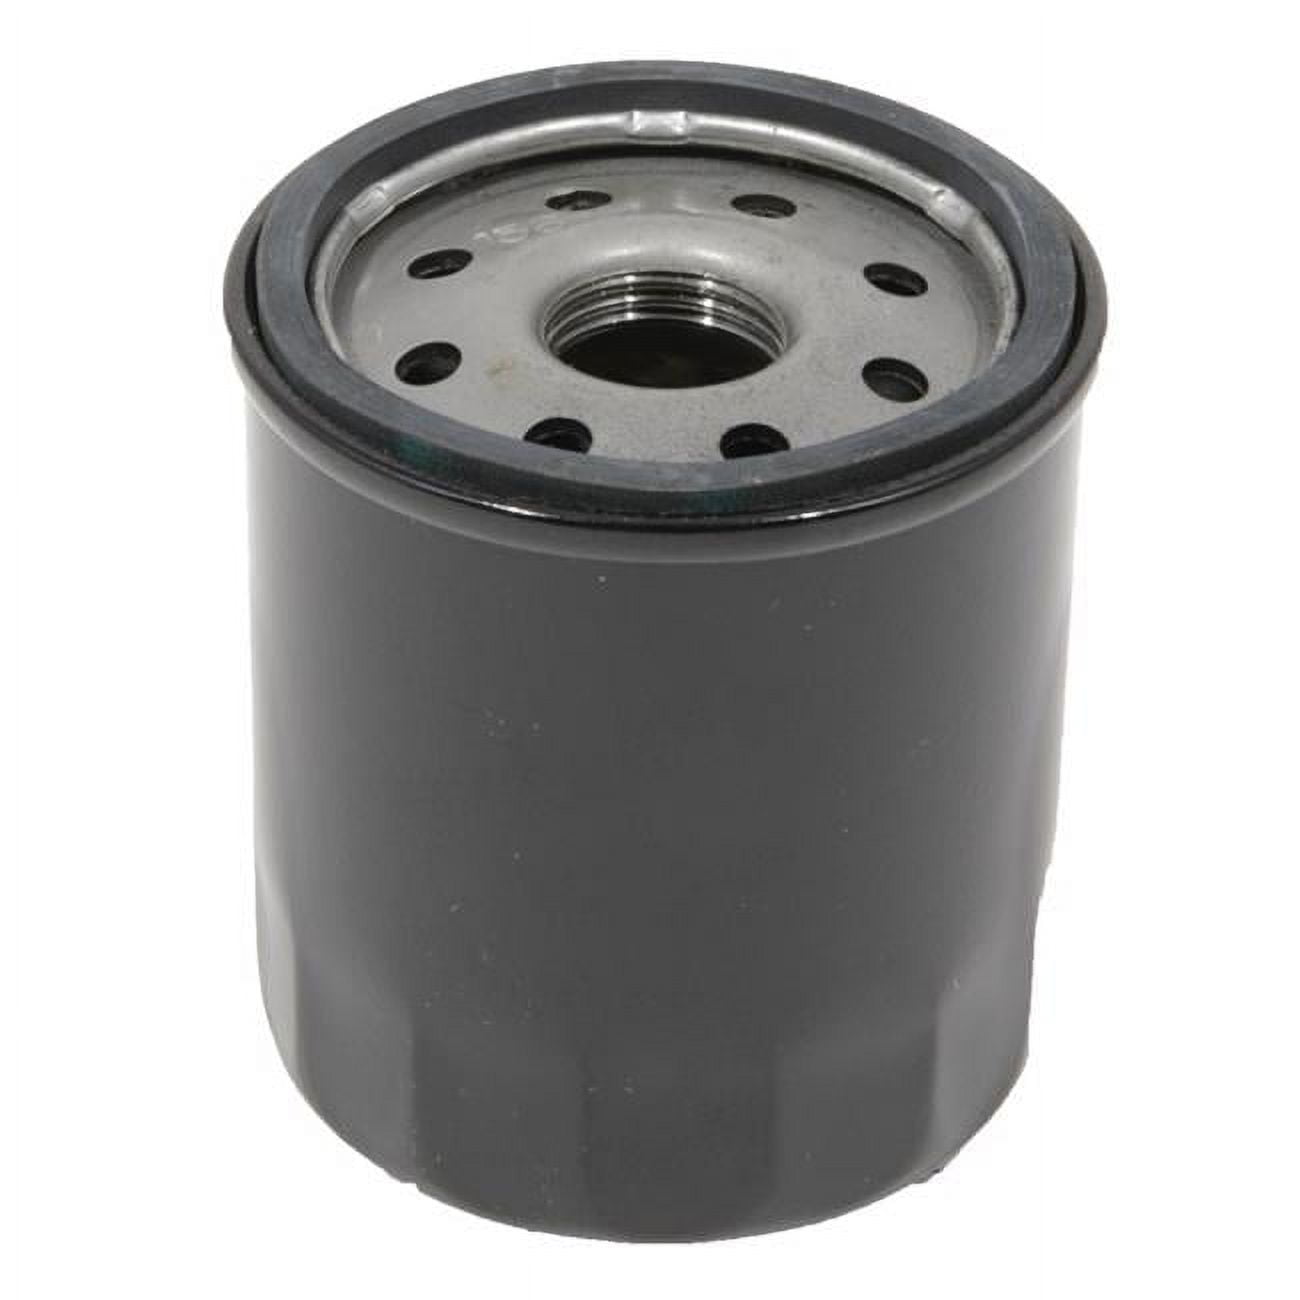 Picture of MTD Products 7002808 Briggs Oil Filter